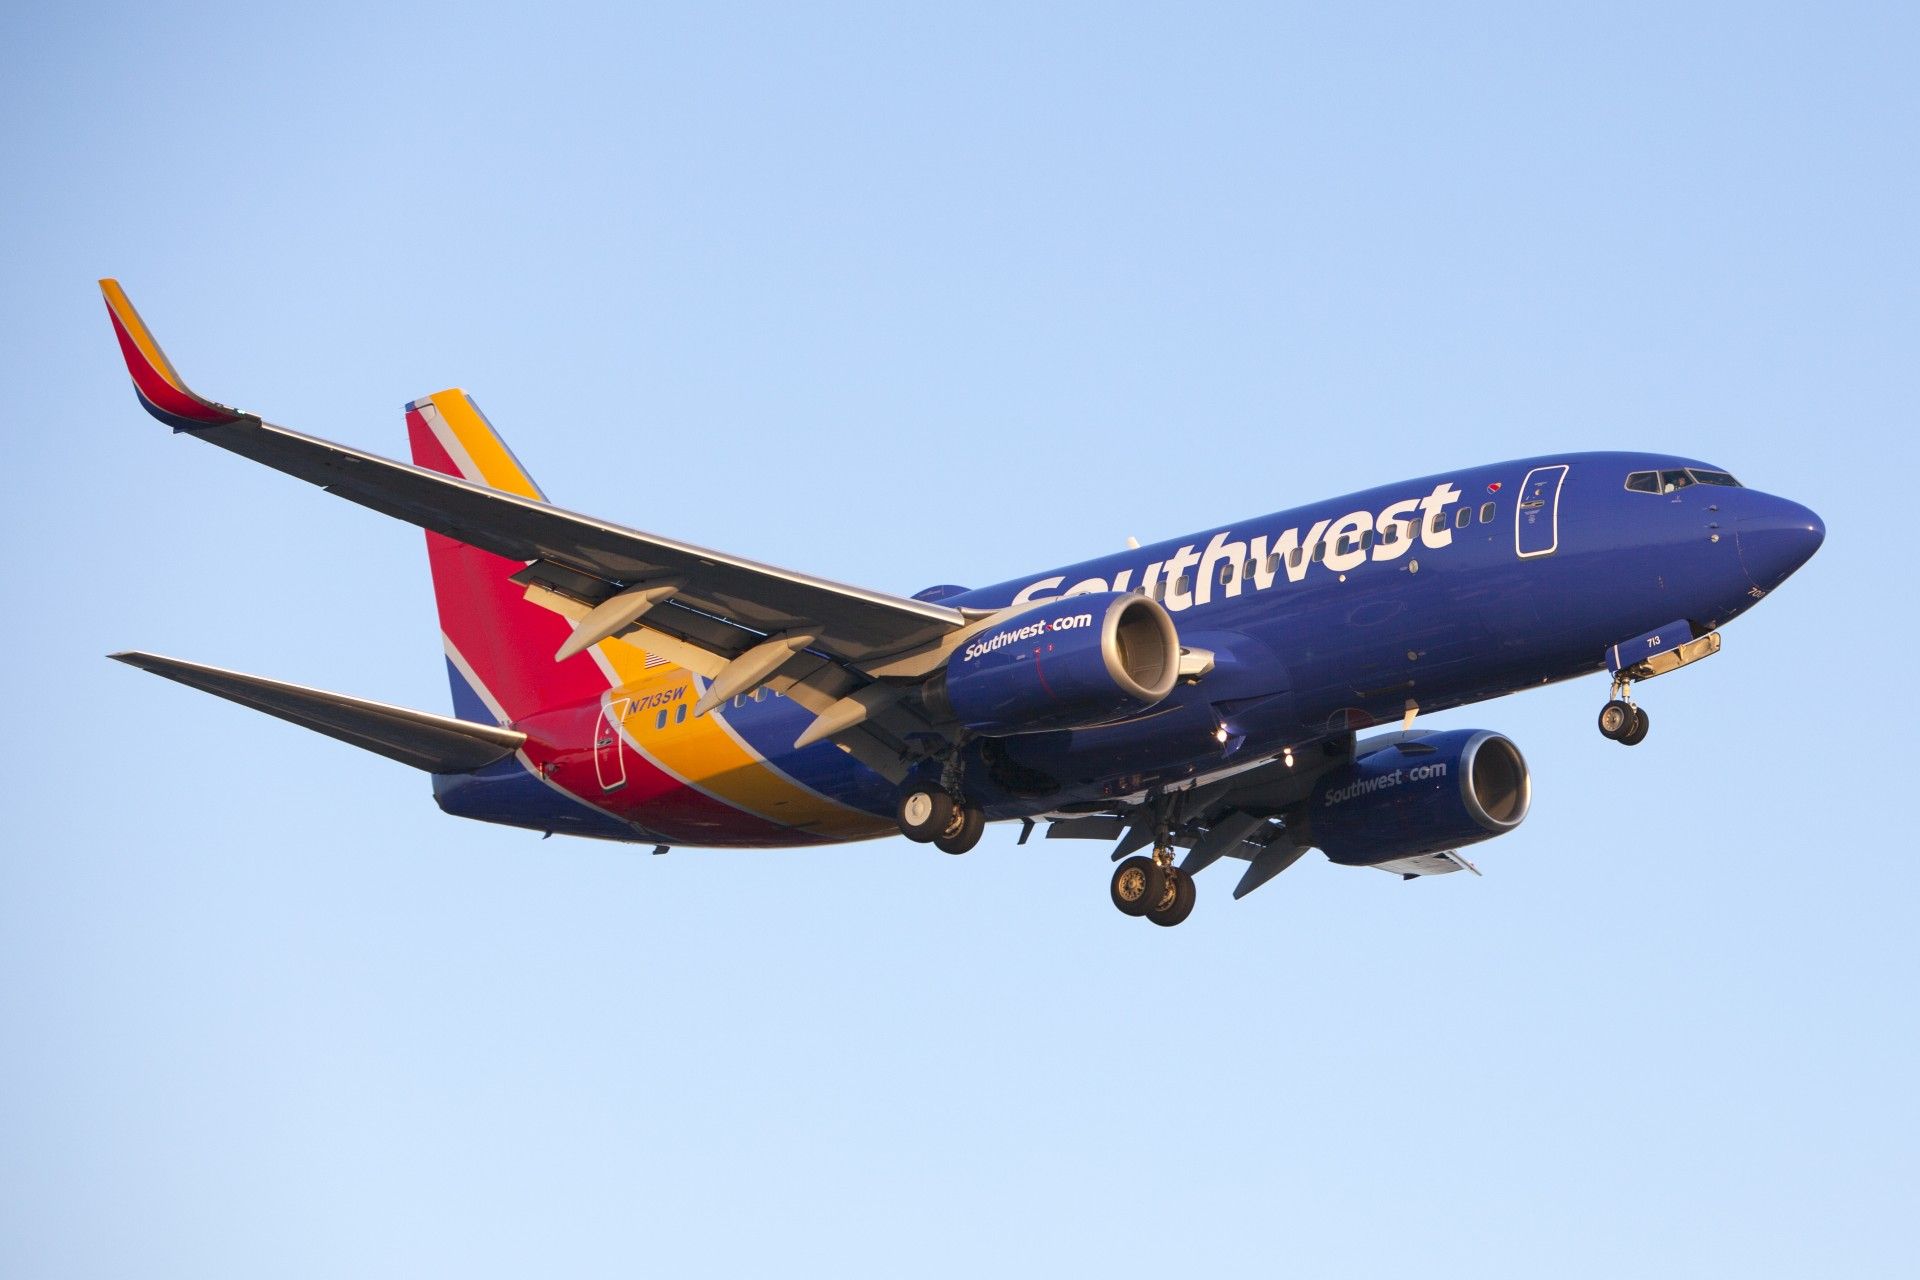 Southwest Airlines plane in flight - domestic airlines price-fixing